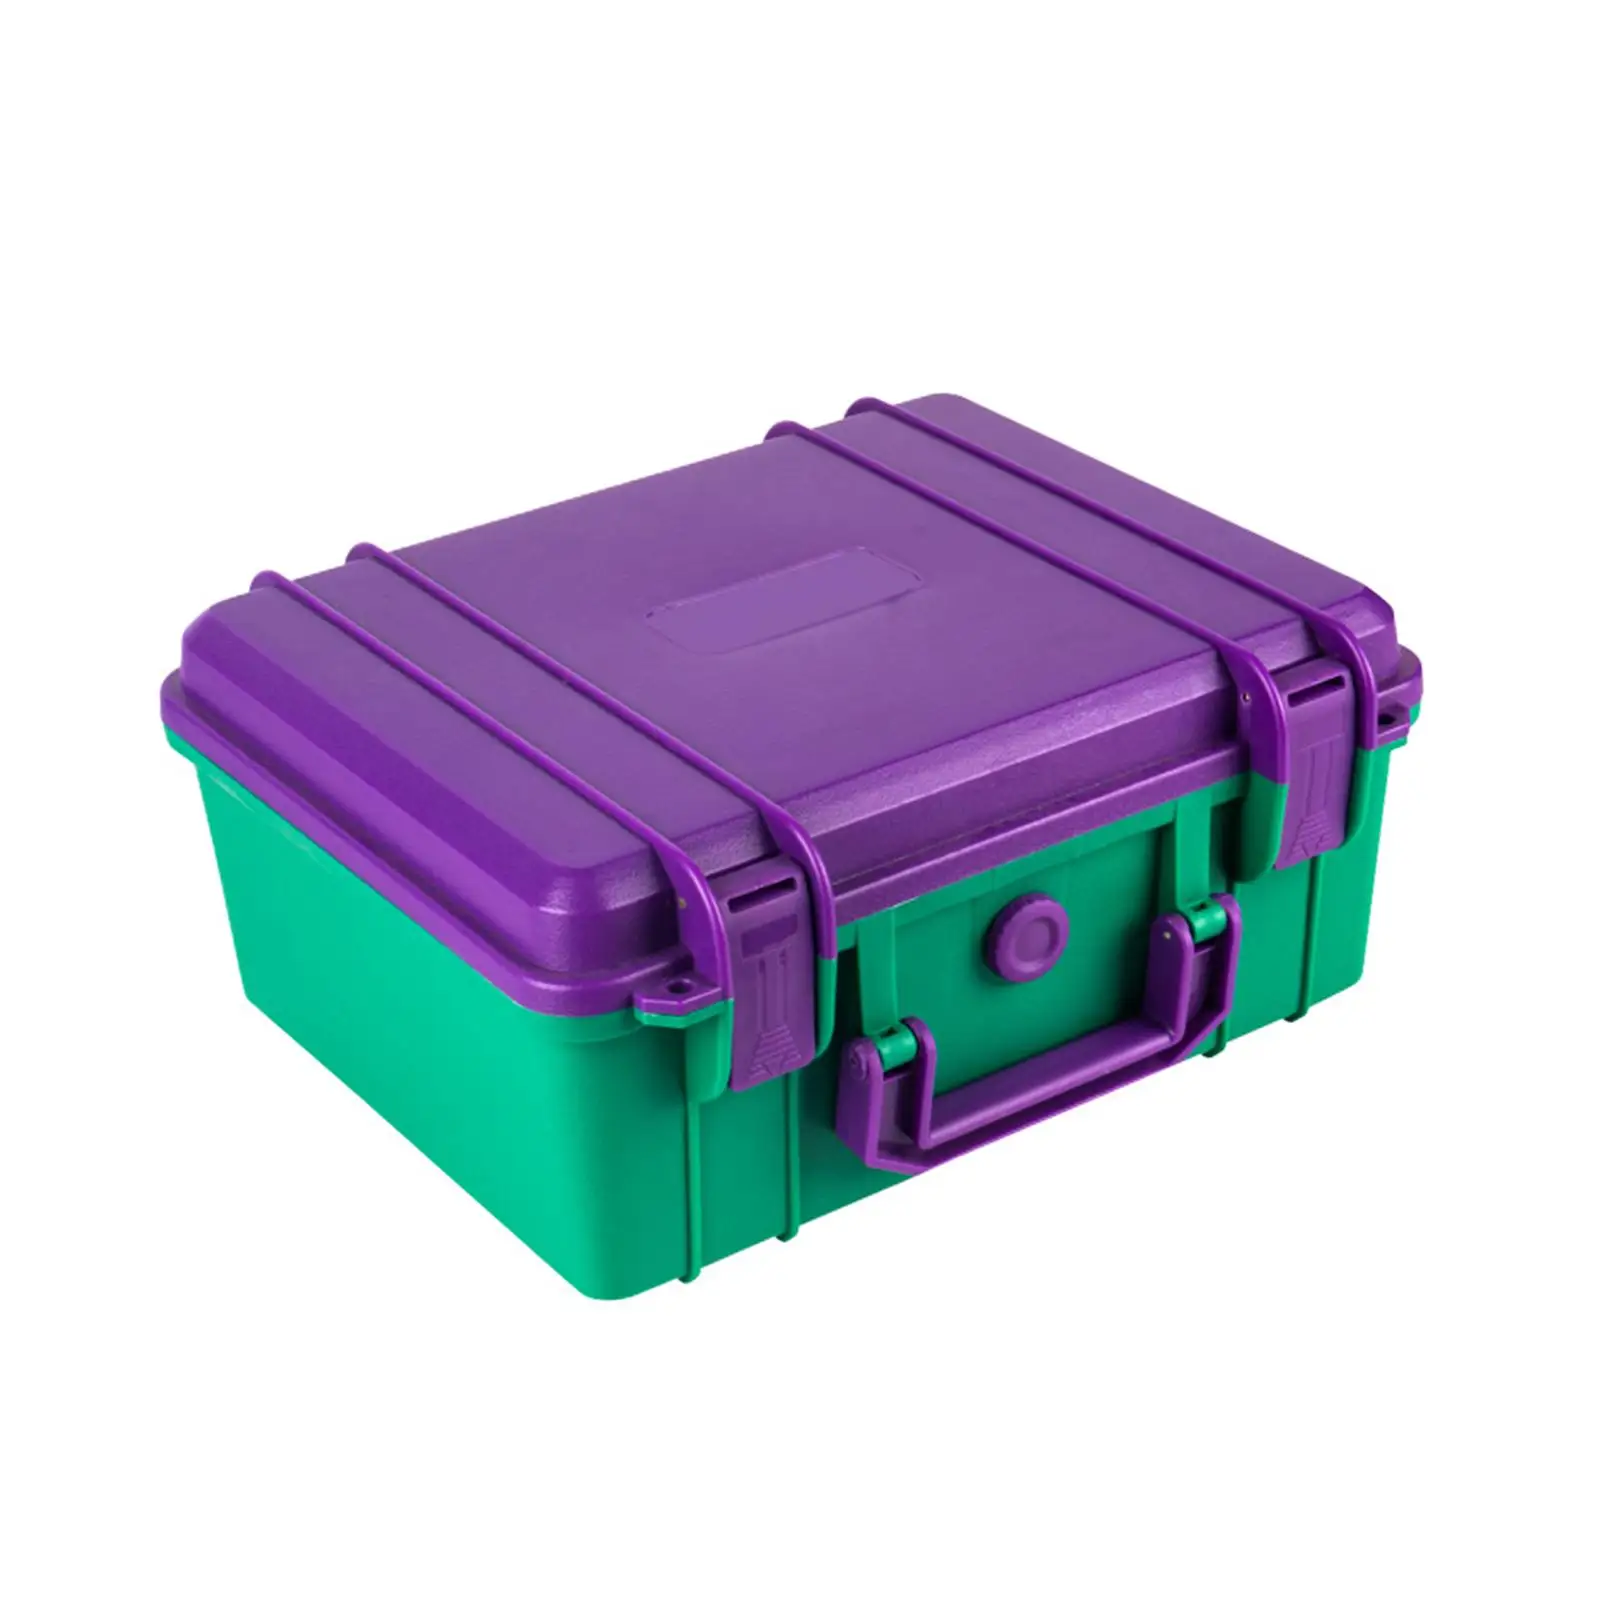 Sealed Waterproof Box Violet and Green 280x240x130mm Hardware Equipment Storage Portable Impact Resistant Weatherproof Hard Case